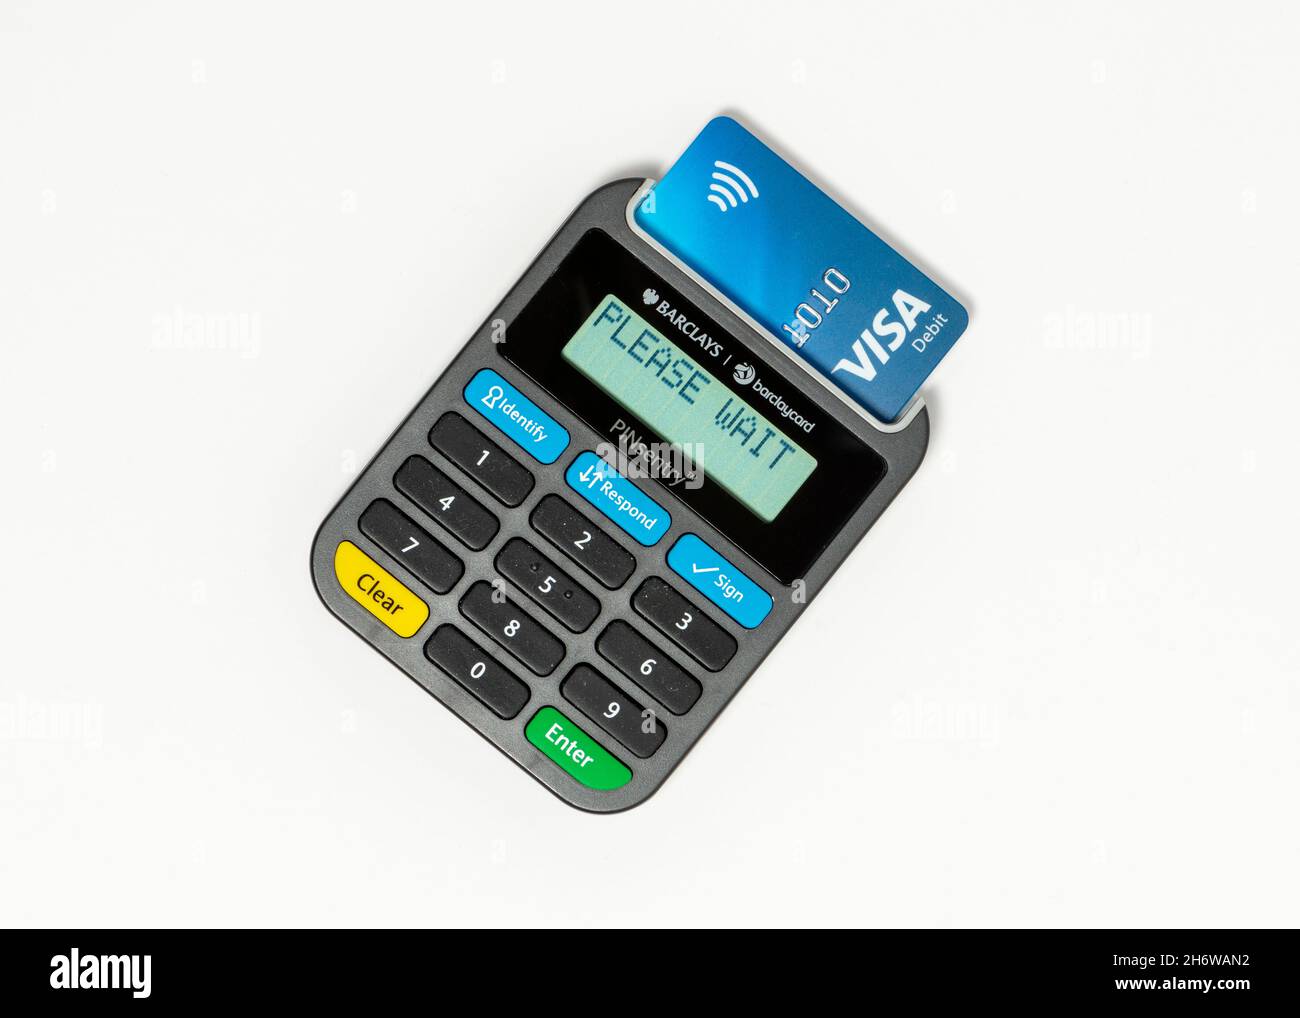 Please Wait message on Barclays Pinsentry card reader device Stock Photo